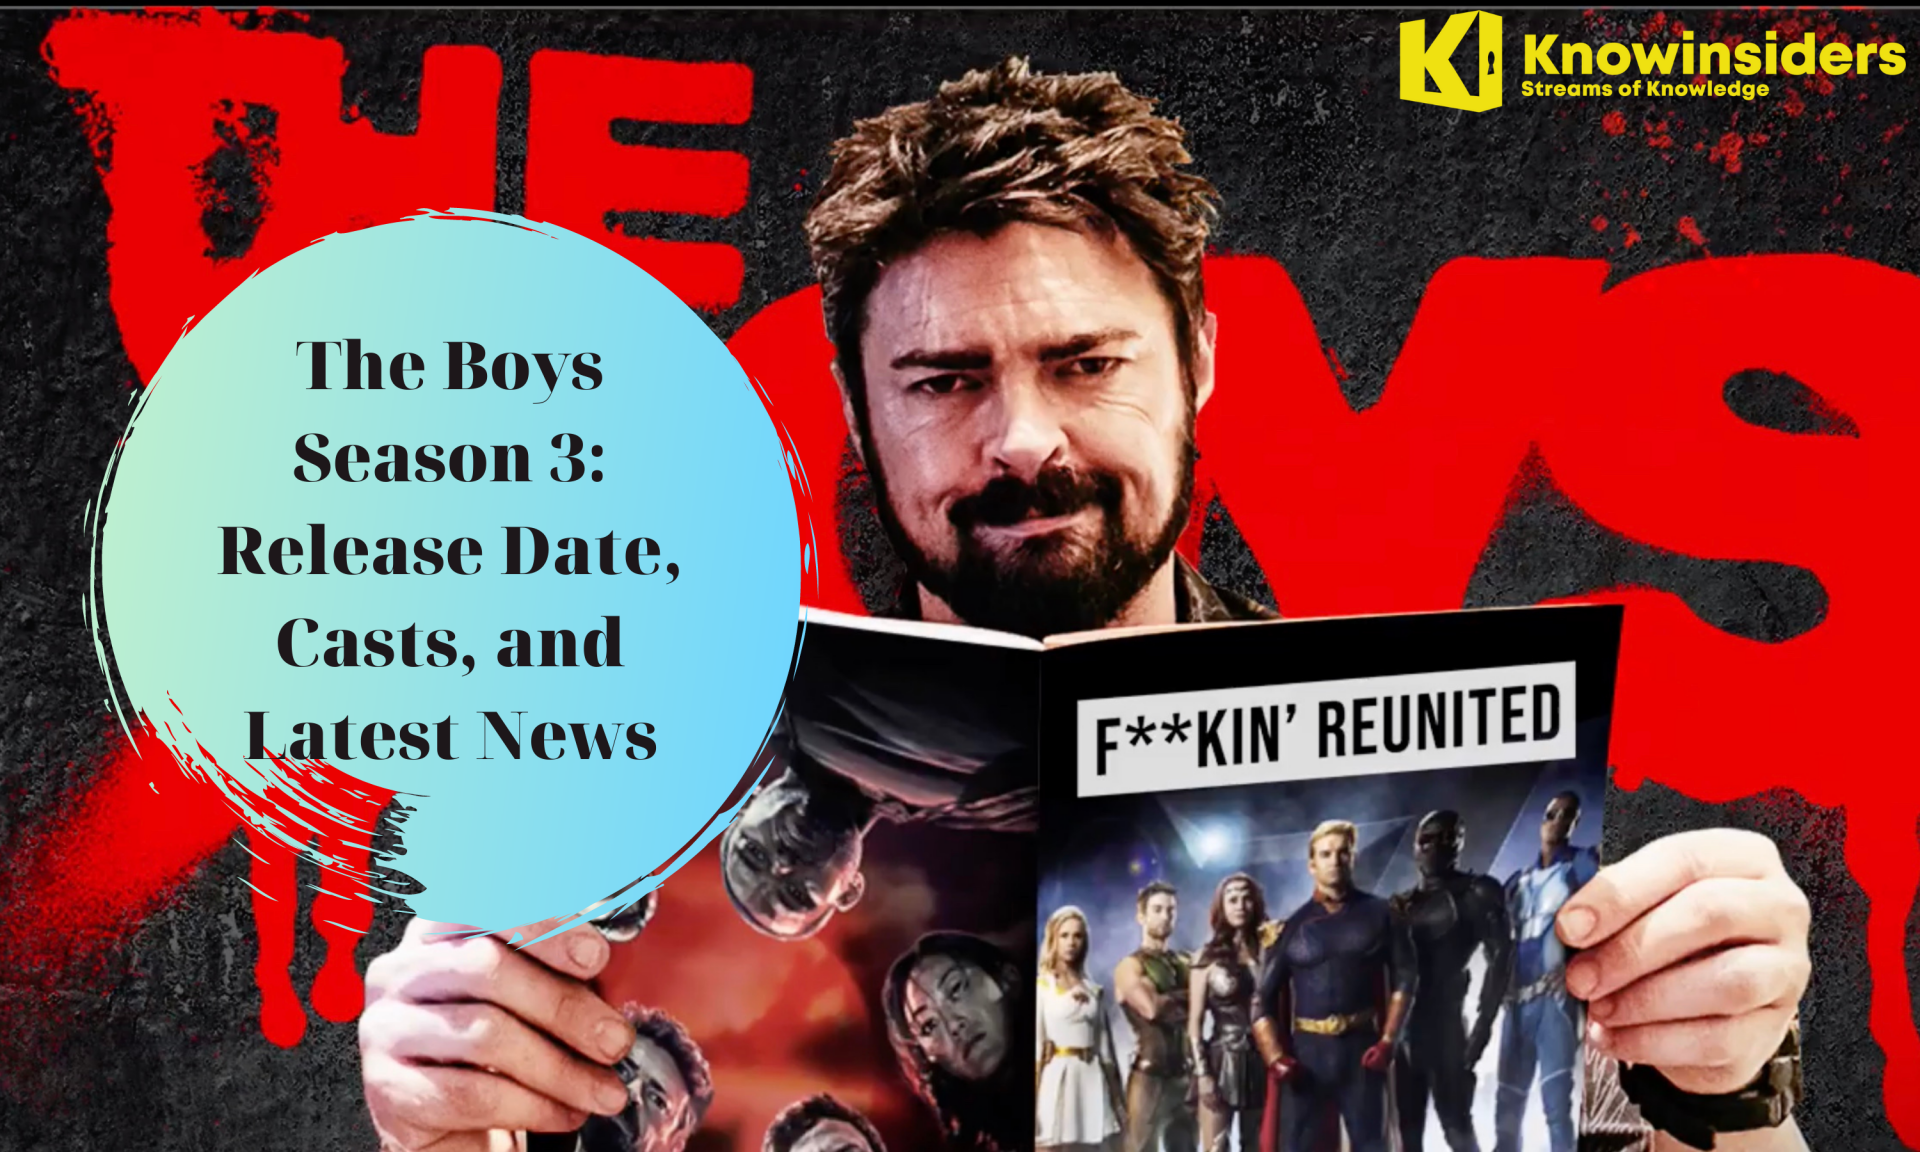 The Boys Season 3: Release Date, Casts and Latest News